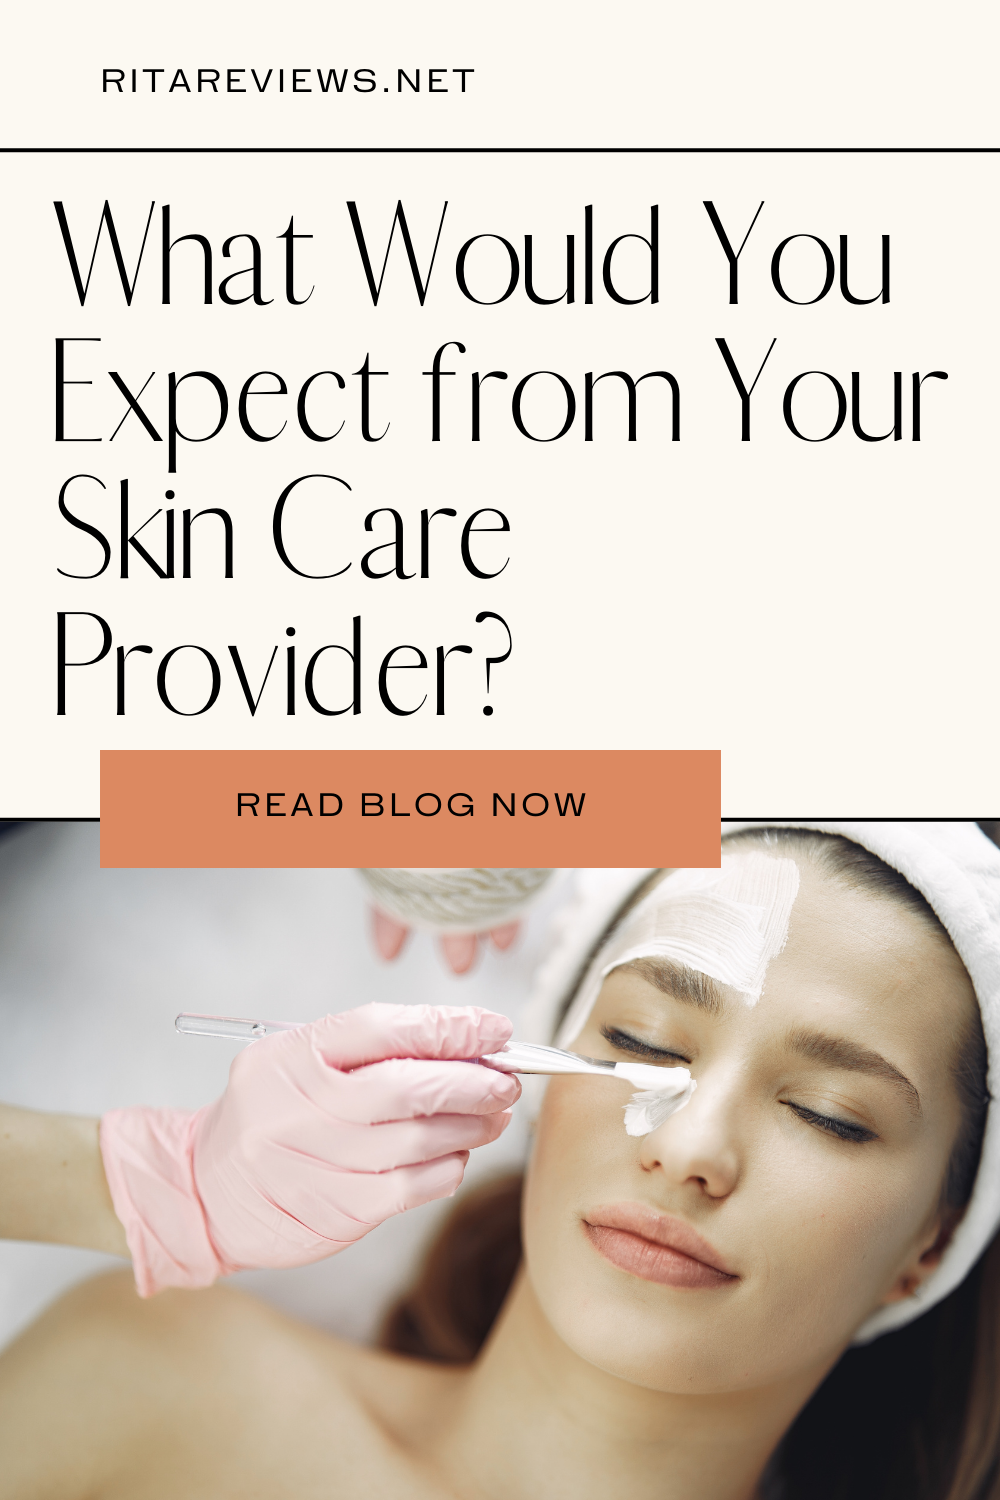 What Would You Expect from Your Skin Care Provider